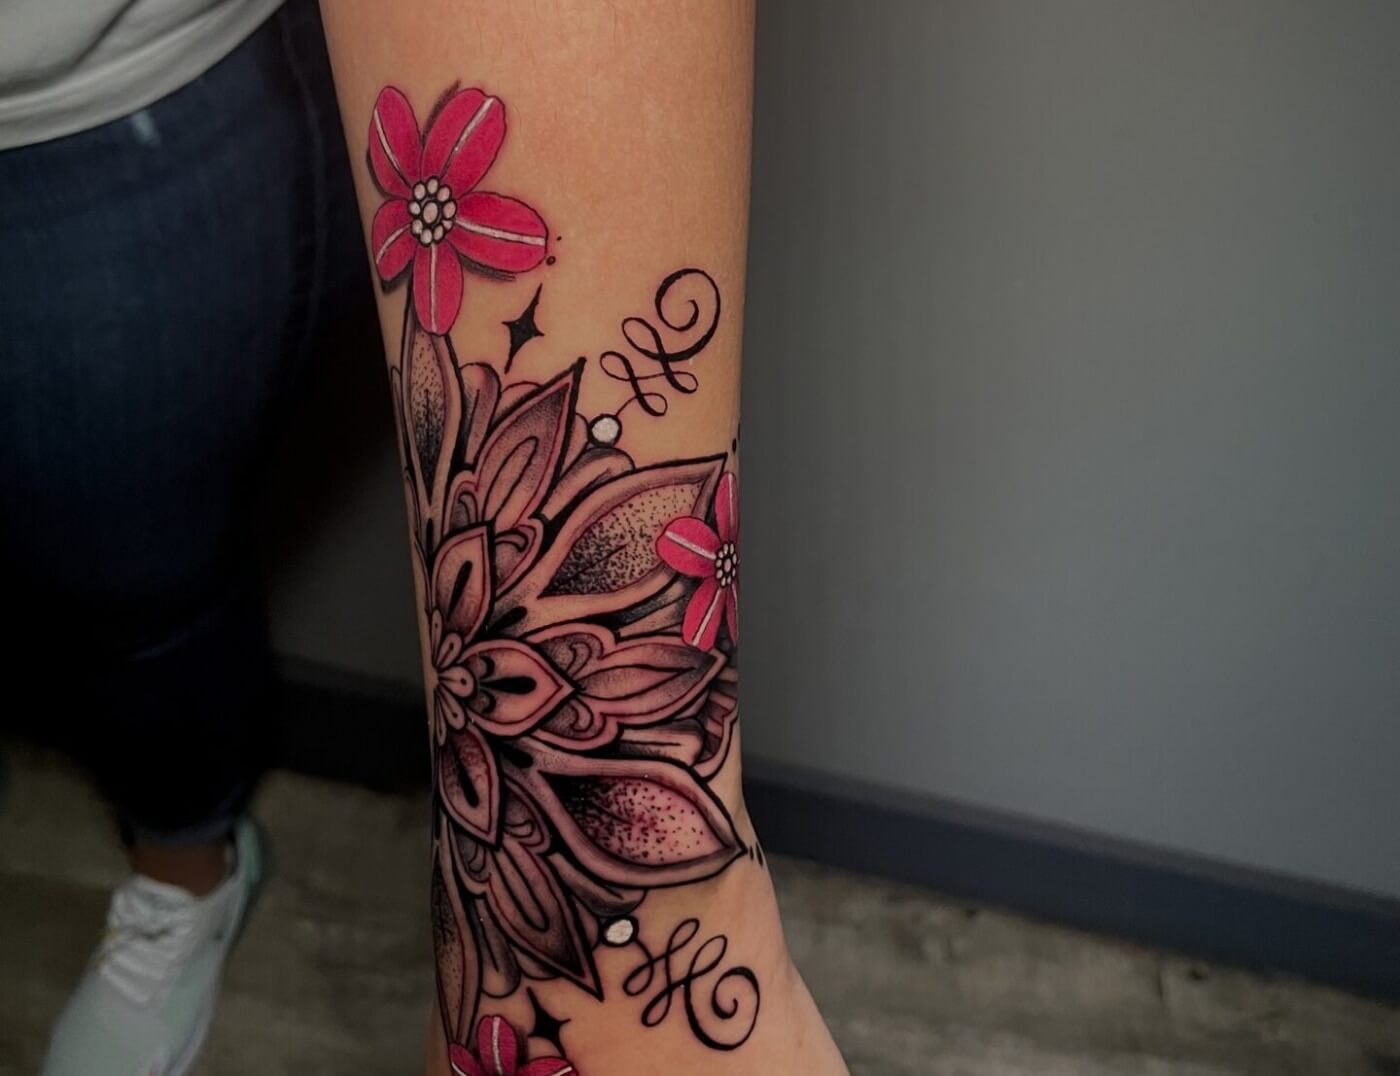 Flower mandala tattoo by Lyric The Artist at Iron Palm Tattoos & Body Piercing in downtown Atlanta, GA. We're open late night til 2AM most nights. Call 404-973-7828 or stop by for a free consultation.